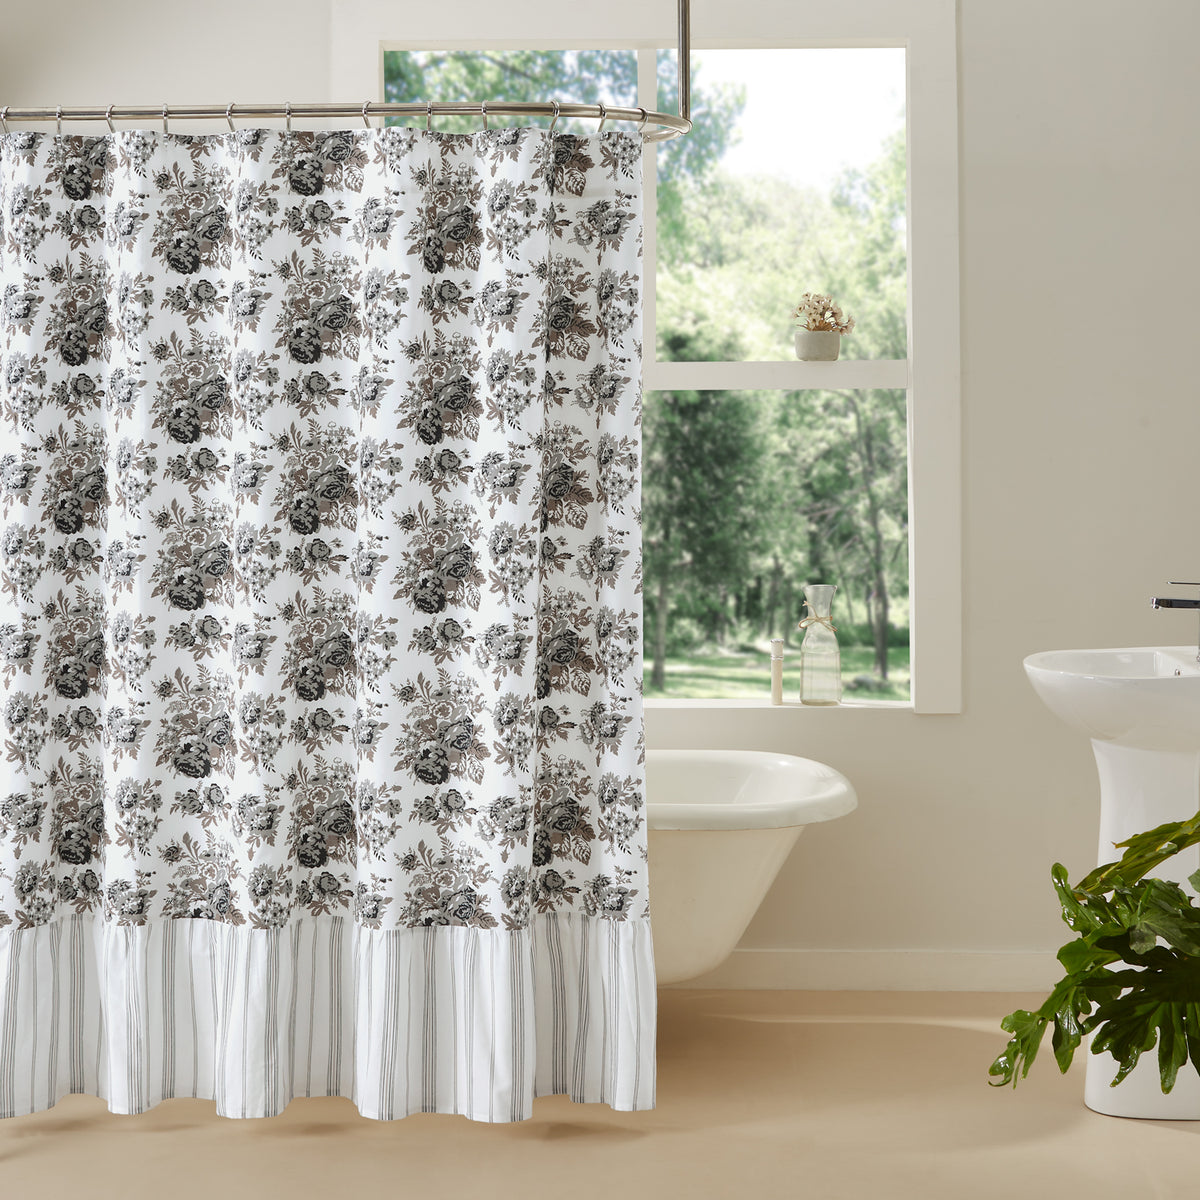 April & Olive Annie Portabella Floral Ruffled Shower Curtain 72x72 By VHC Brands